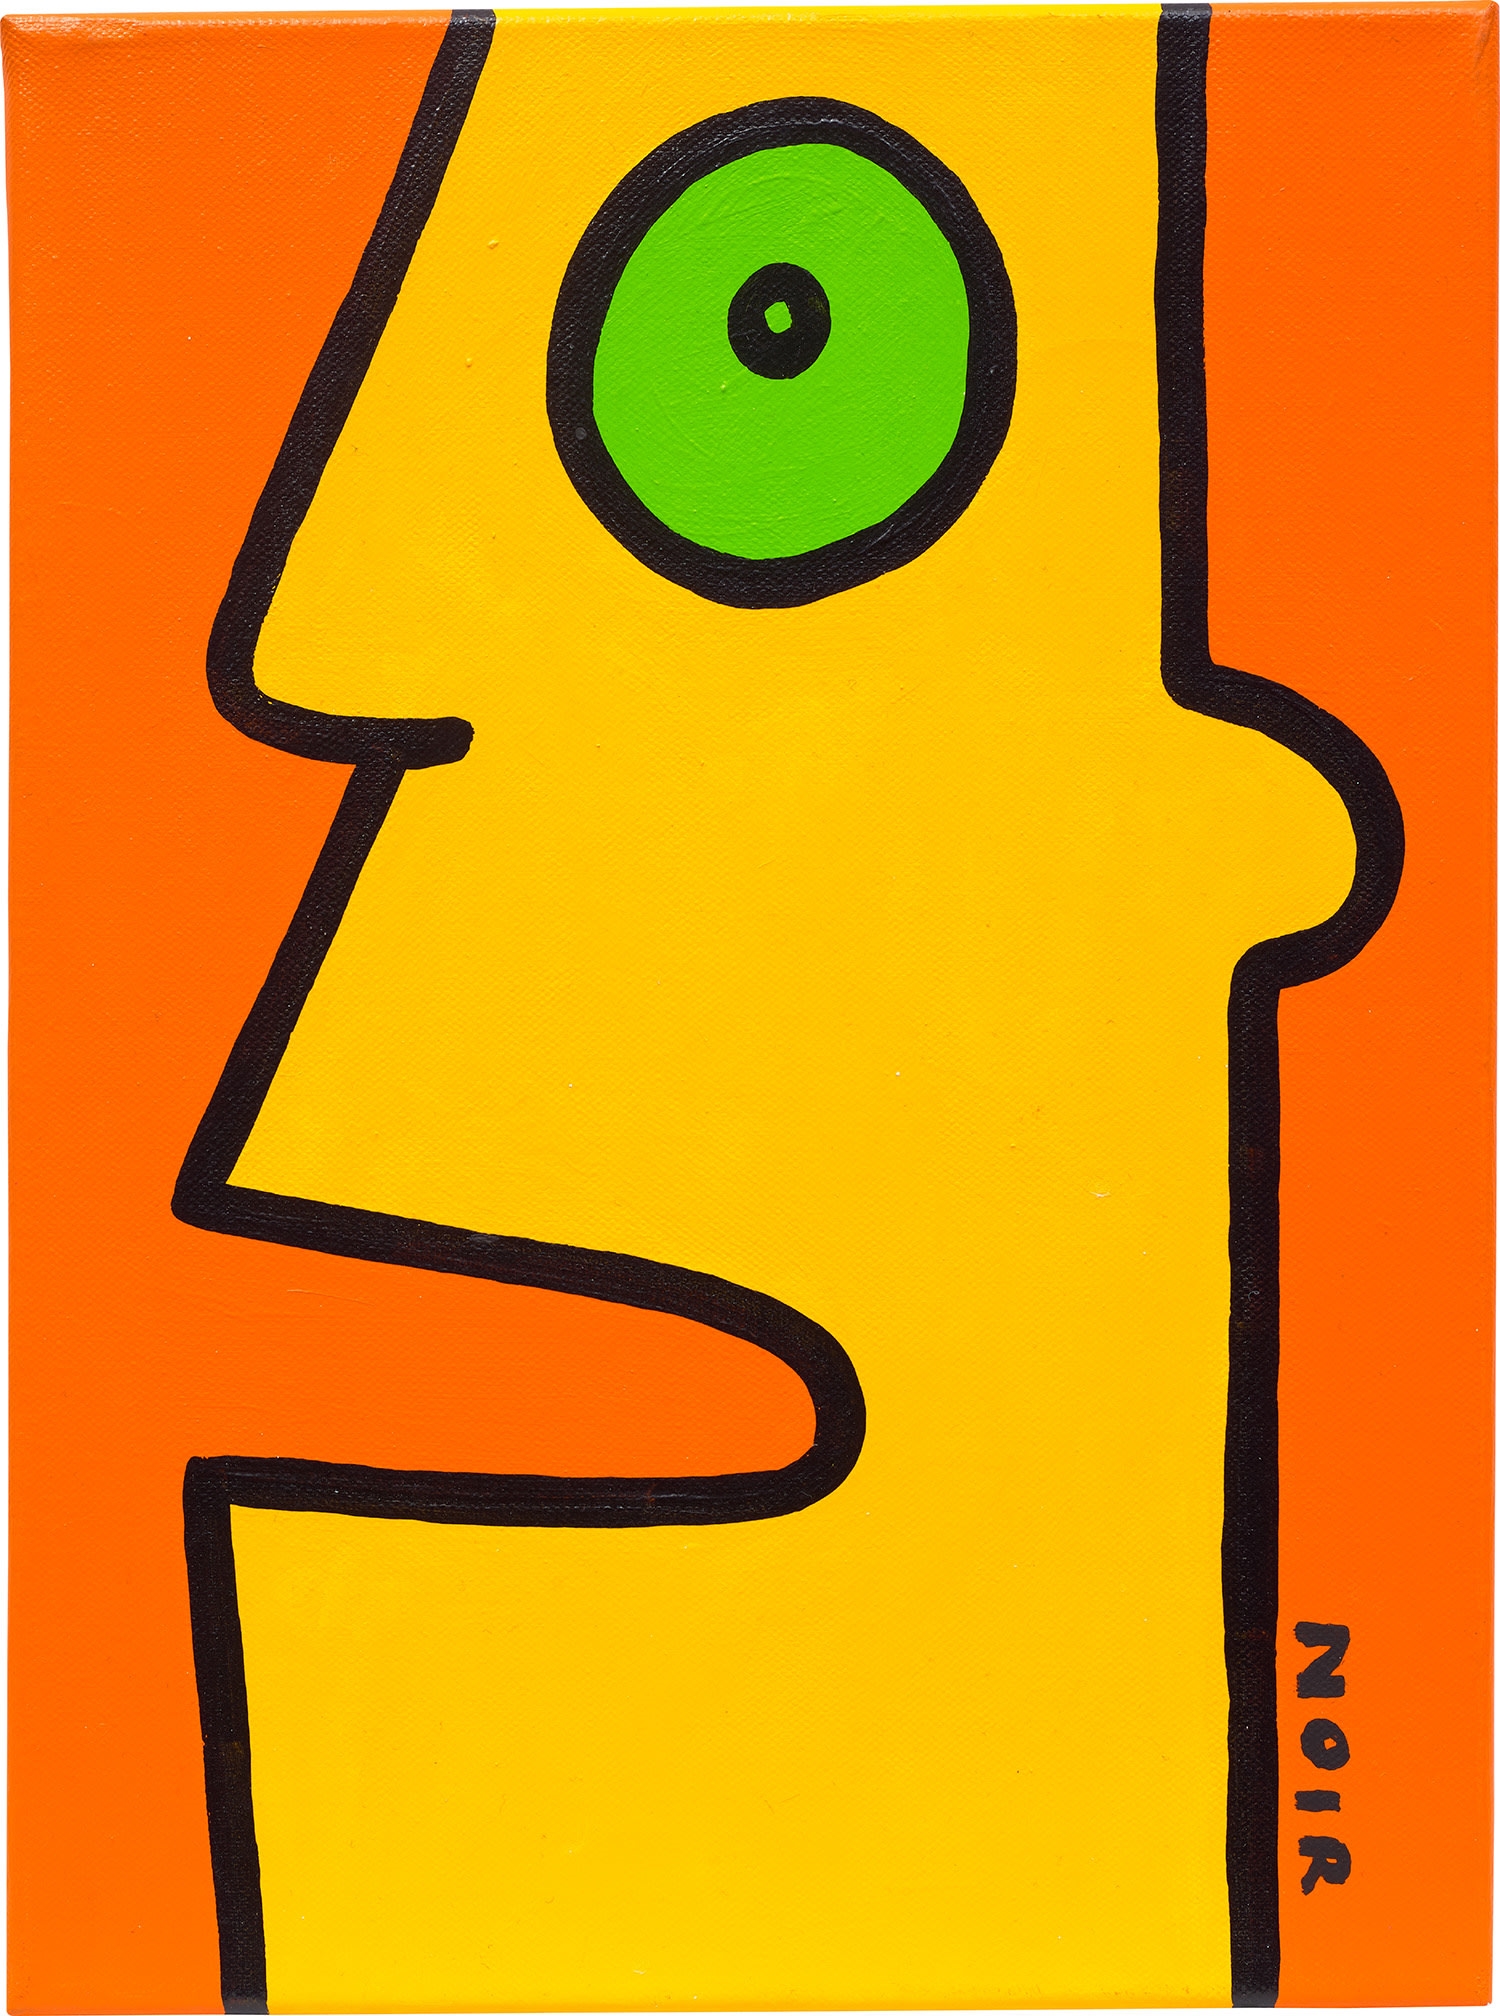 Artwork by Thierry Noir, Two works: (i) Ich Schwitze Ungern Deshalb Ganz Ruhig!; (ii) I Think About Something Hou La La It Is So Important I Have To Write It Down Immediately, Made of acrylic on canvas